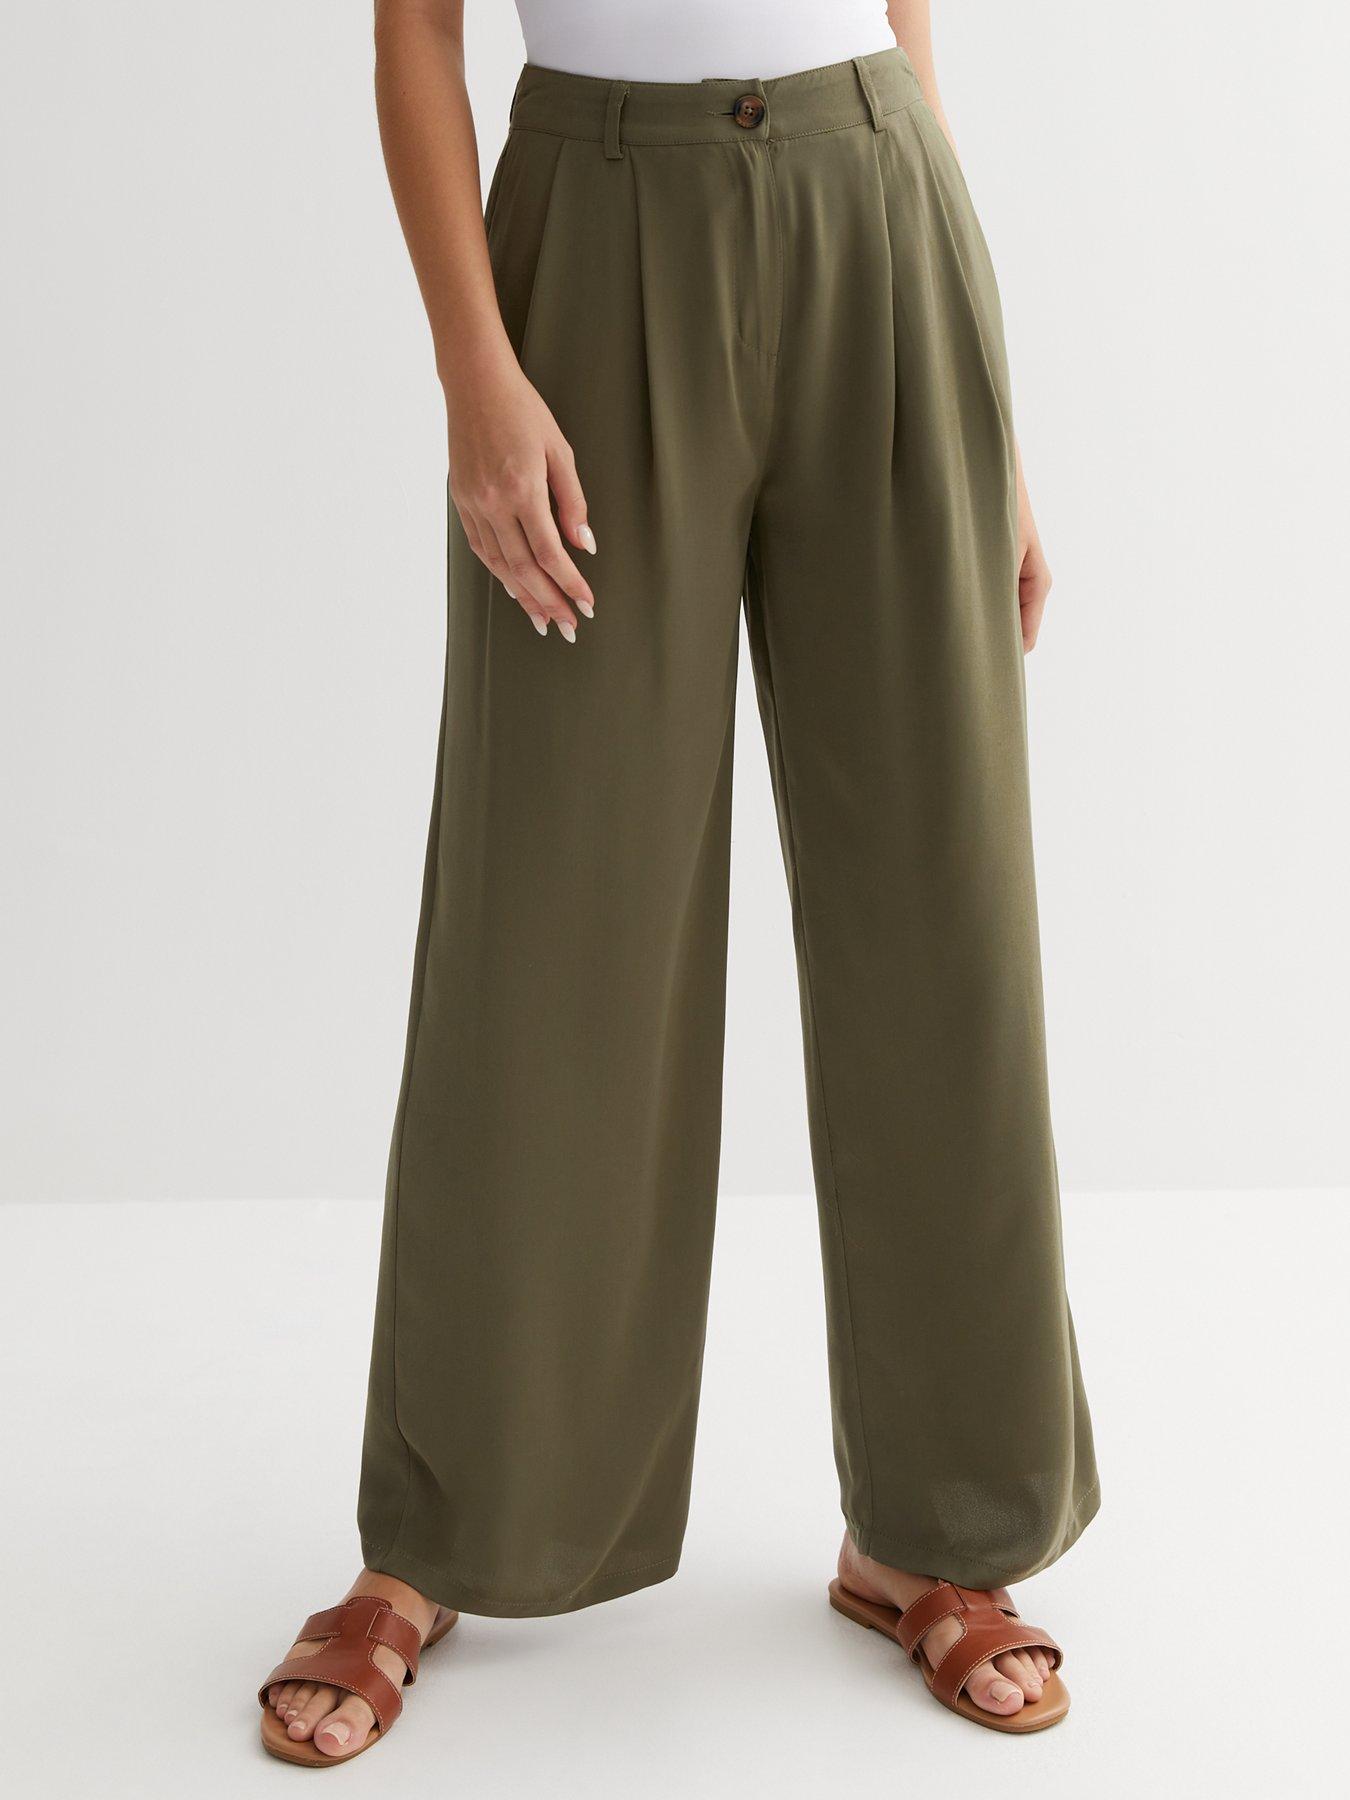 New Look Khaki Tailored Wide Leg Trousers | very.co.uk